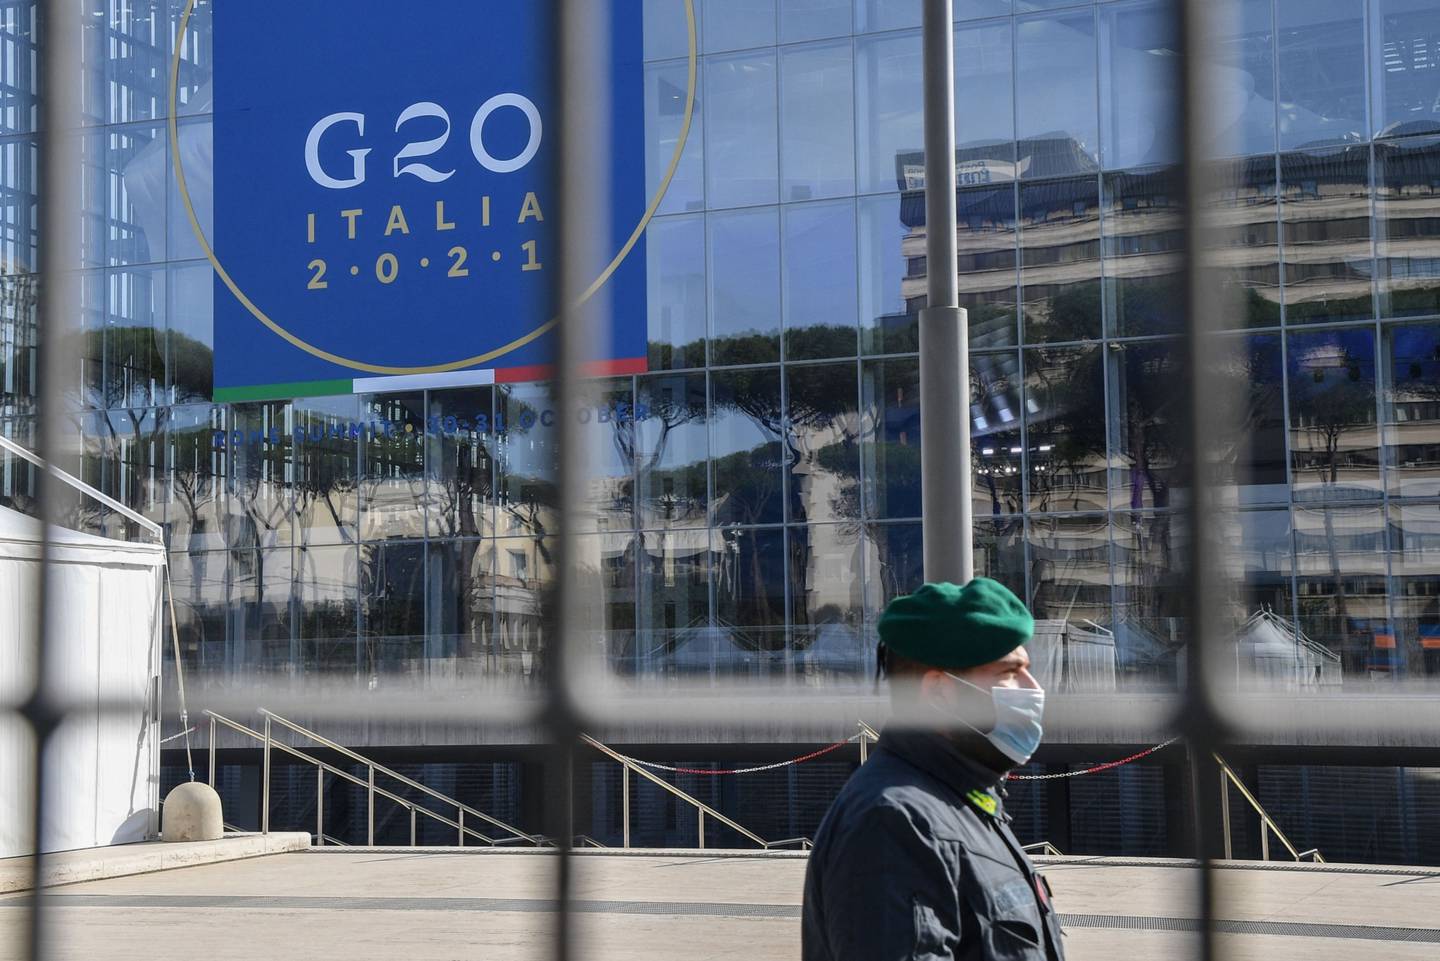 An officer of the Guardia di Finanza (GdF) Italian law enforcement agency stands guard outside the convention center "La Nuvola".